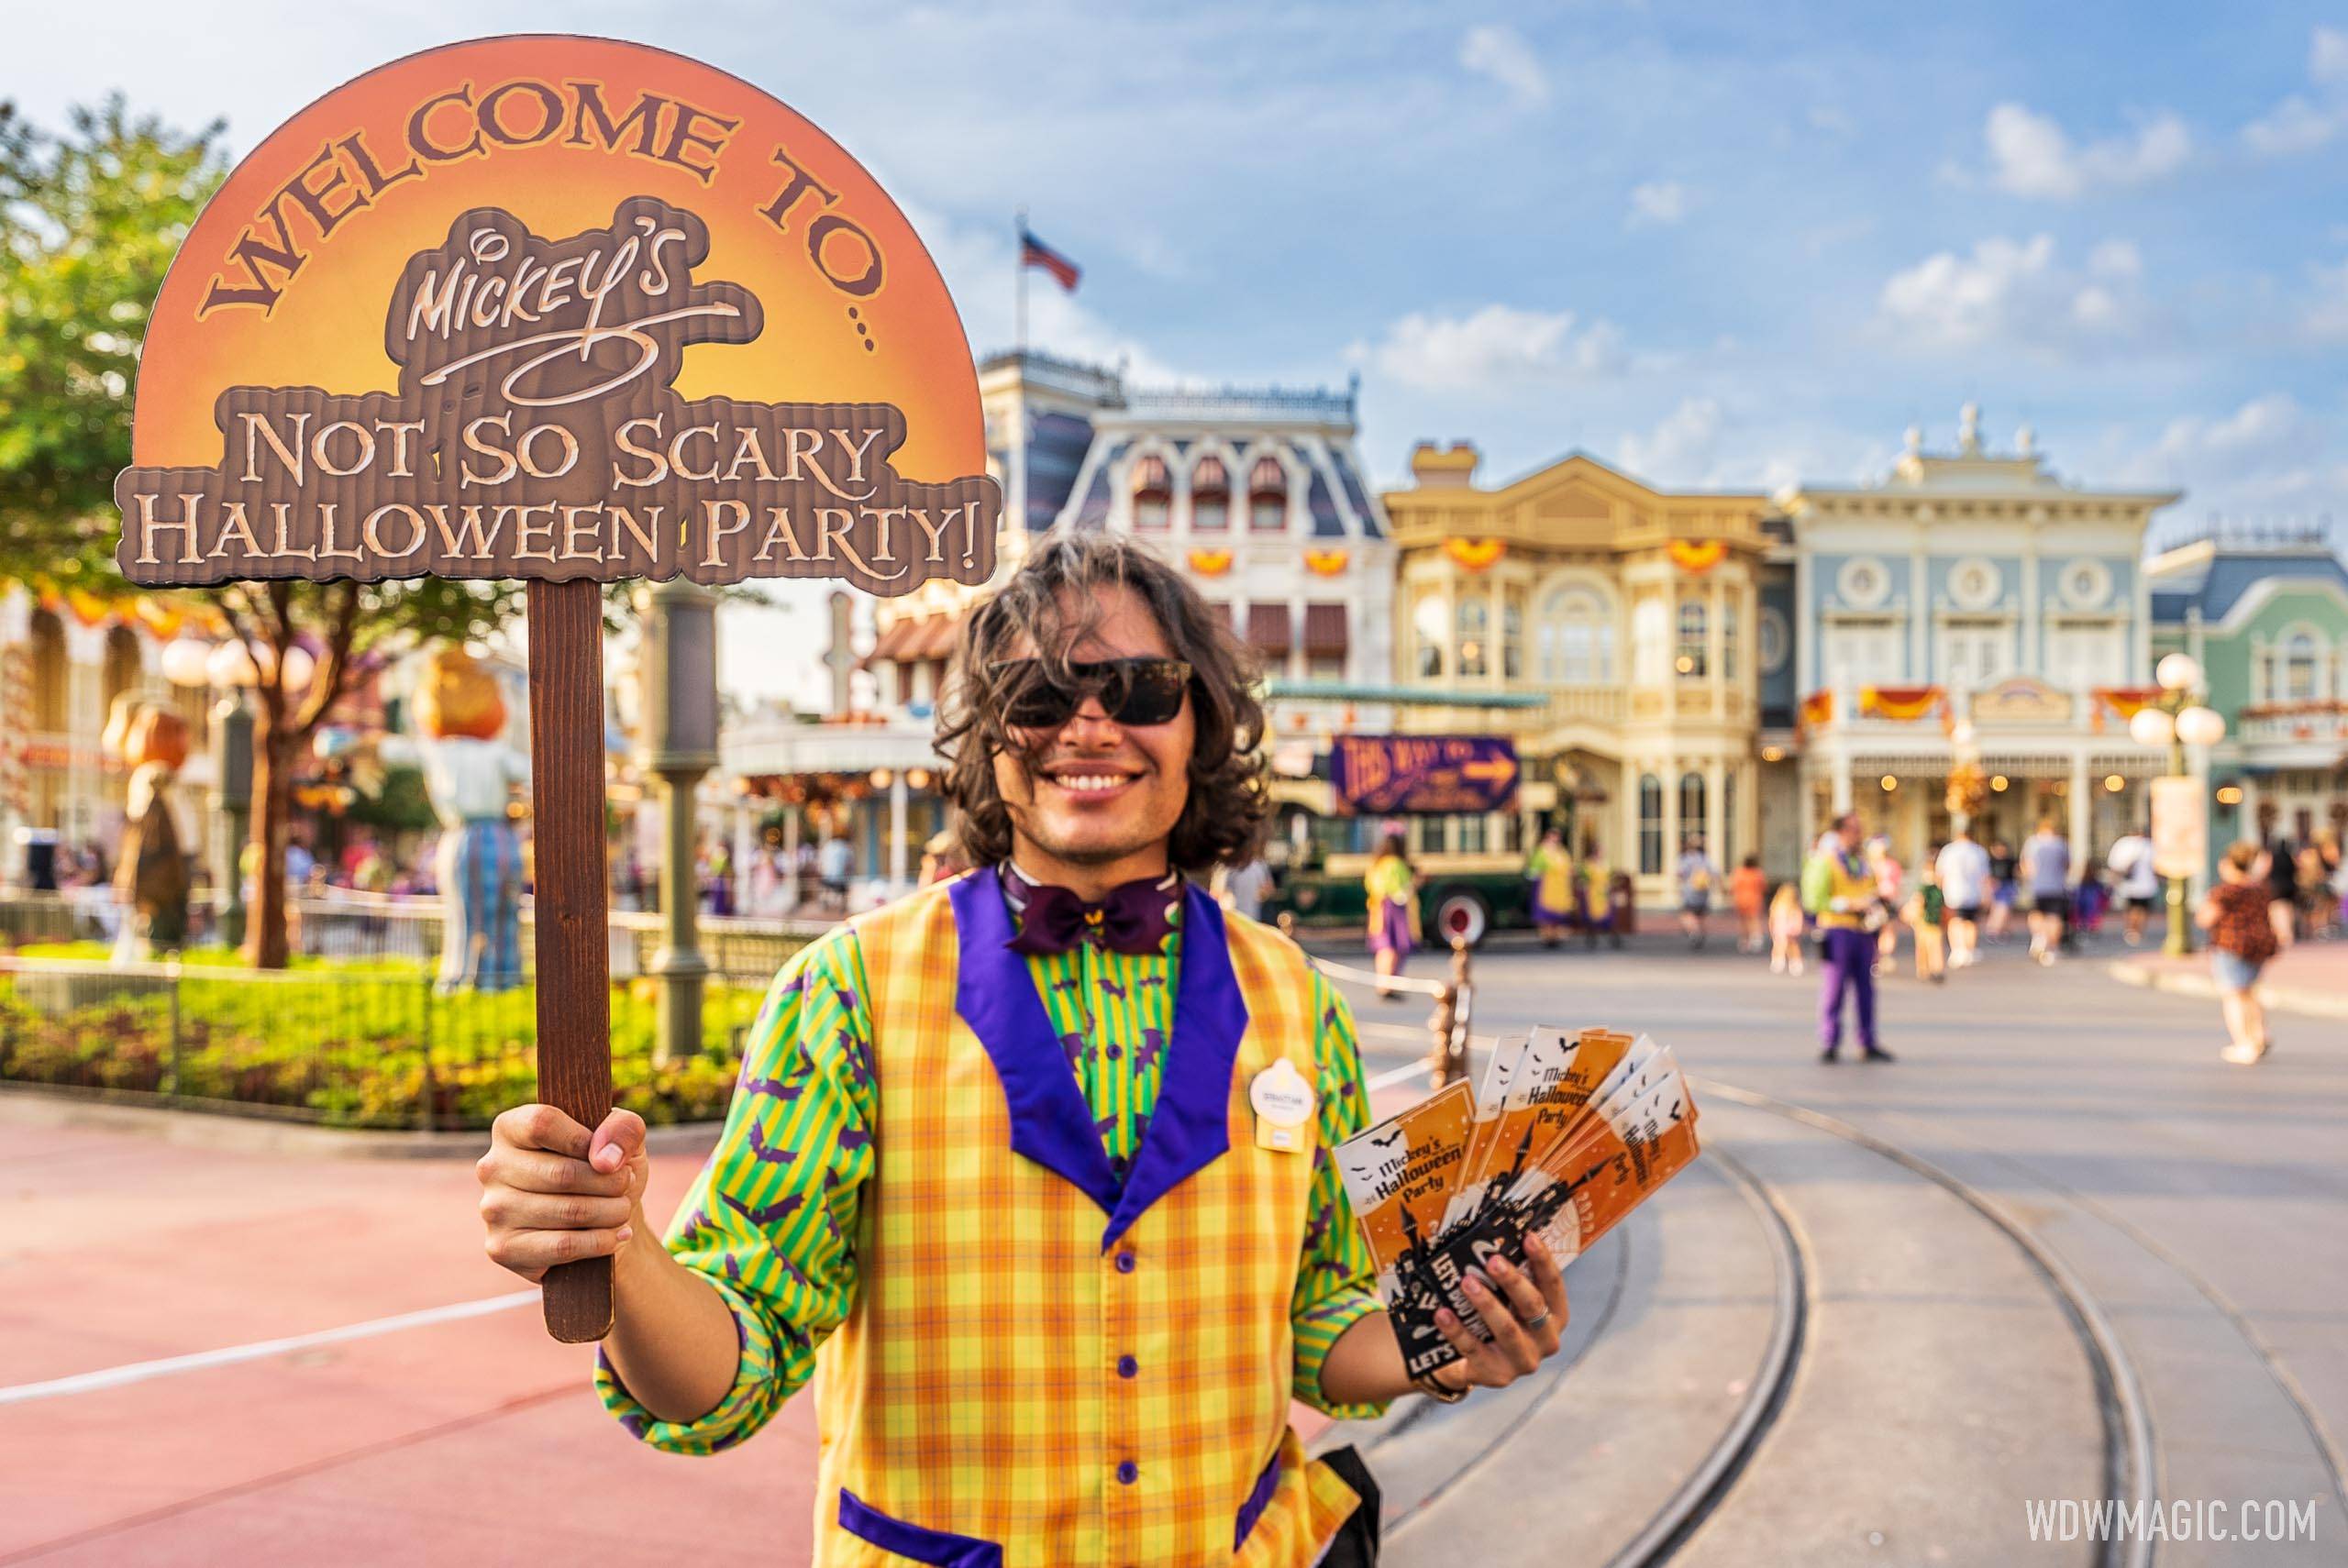 Disney World's Mickey's Not-So-Scary Halloween Party continues to sell out dates at a rapid pace